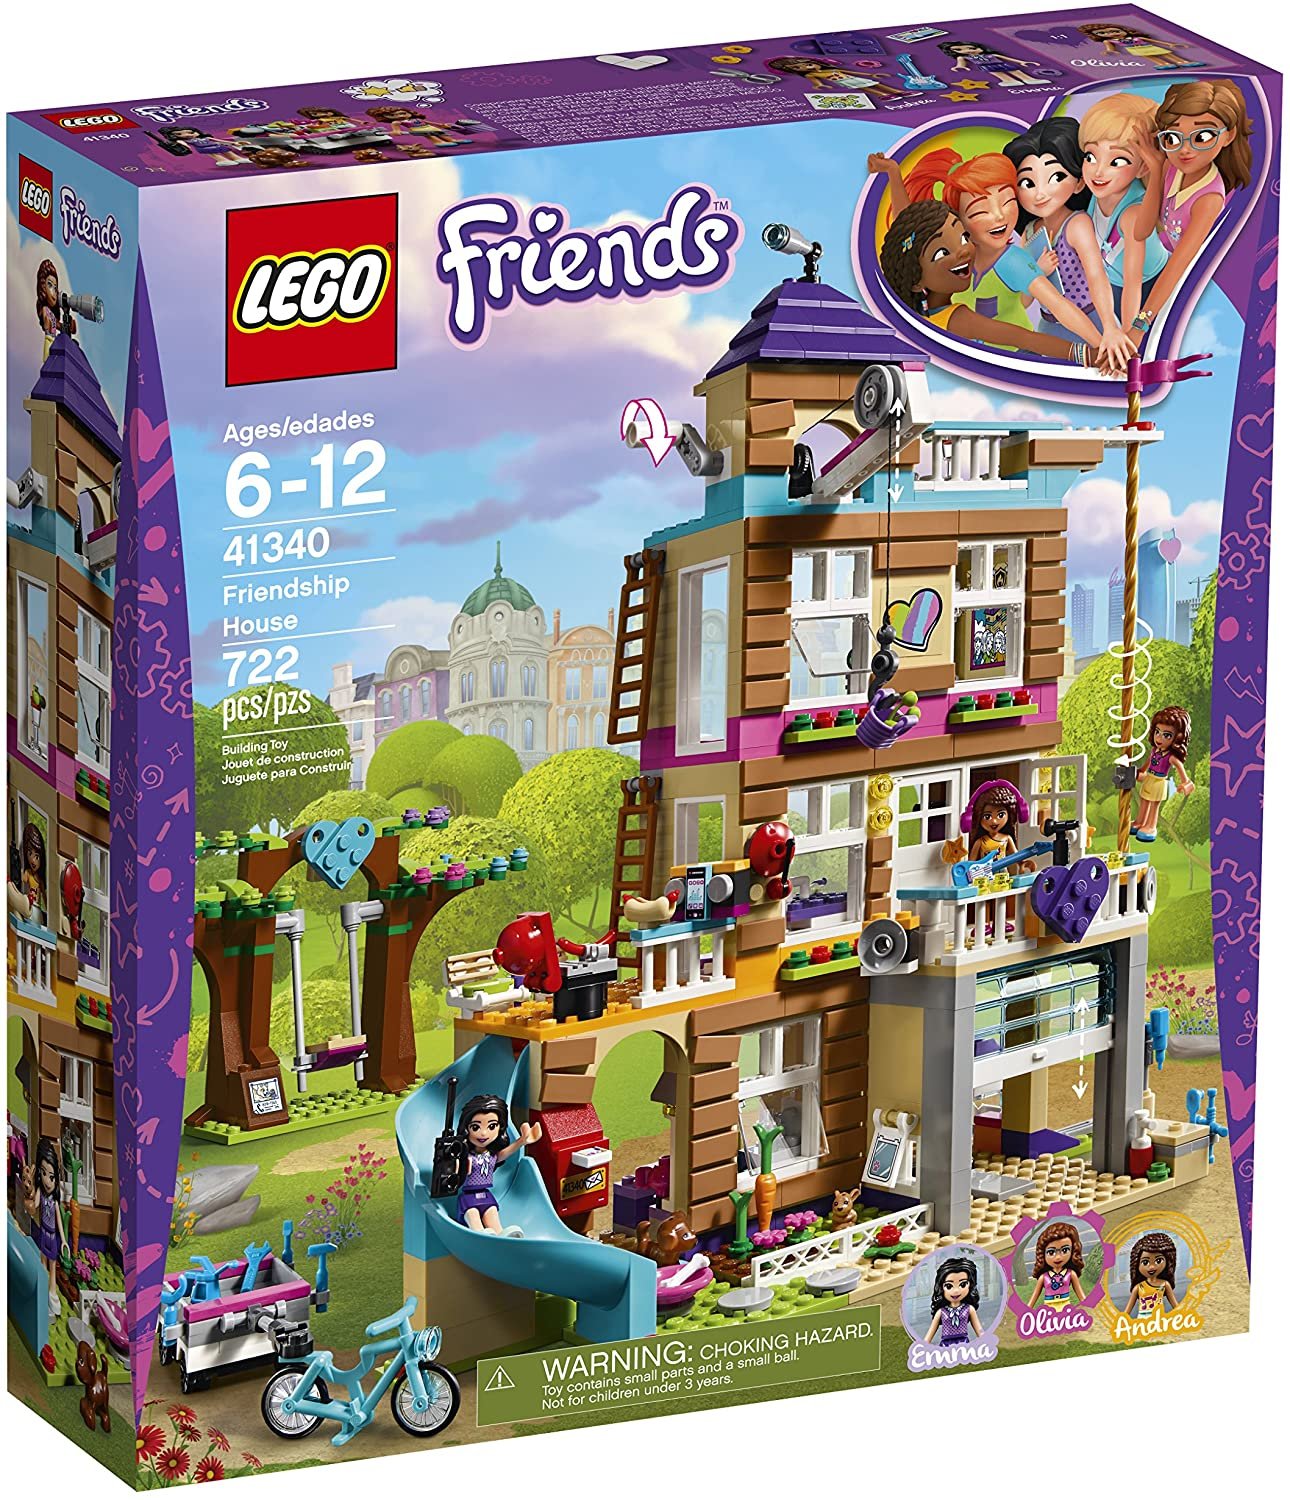 LEGO Friends Friendship House 41340 Kids Building Set with MiniDoll